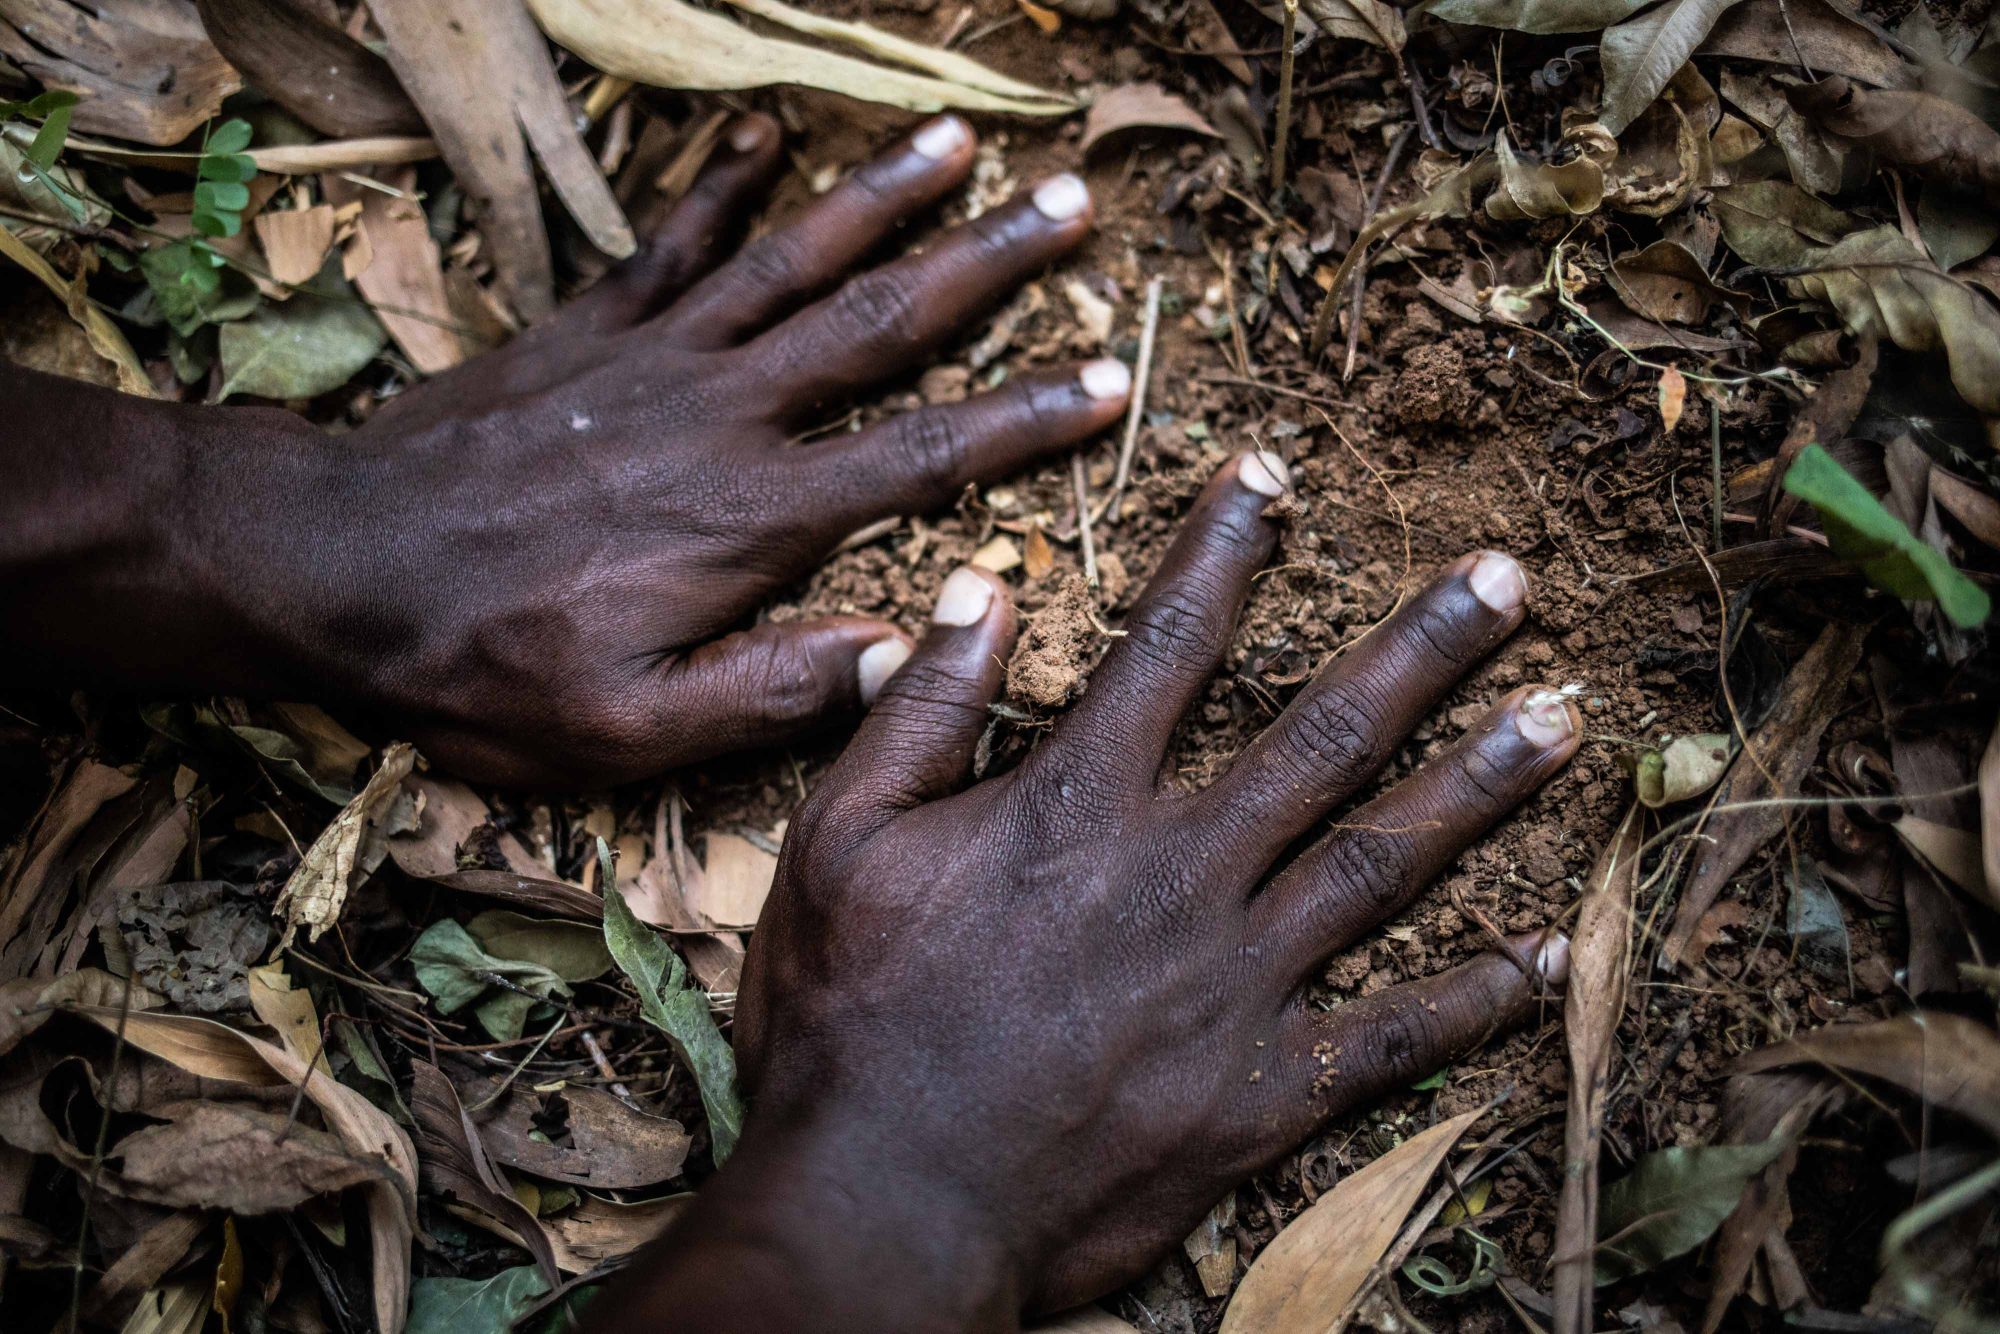 Telimele, Guinea. January 13, 2022. Lamarana, Abdoul’s brother, one of the passengers who died in Italy on January 23, 2019, <br>
touches the ground at the place where his brother was buried in his hometown. 
Abdoul’s body was repatriated to his country and rests in the cemetery of Telimele, a few meters from his home. ©︎ César Dezfuli